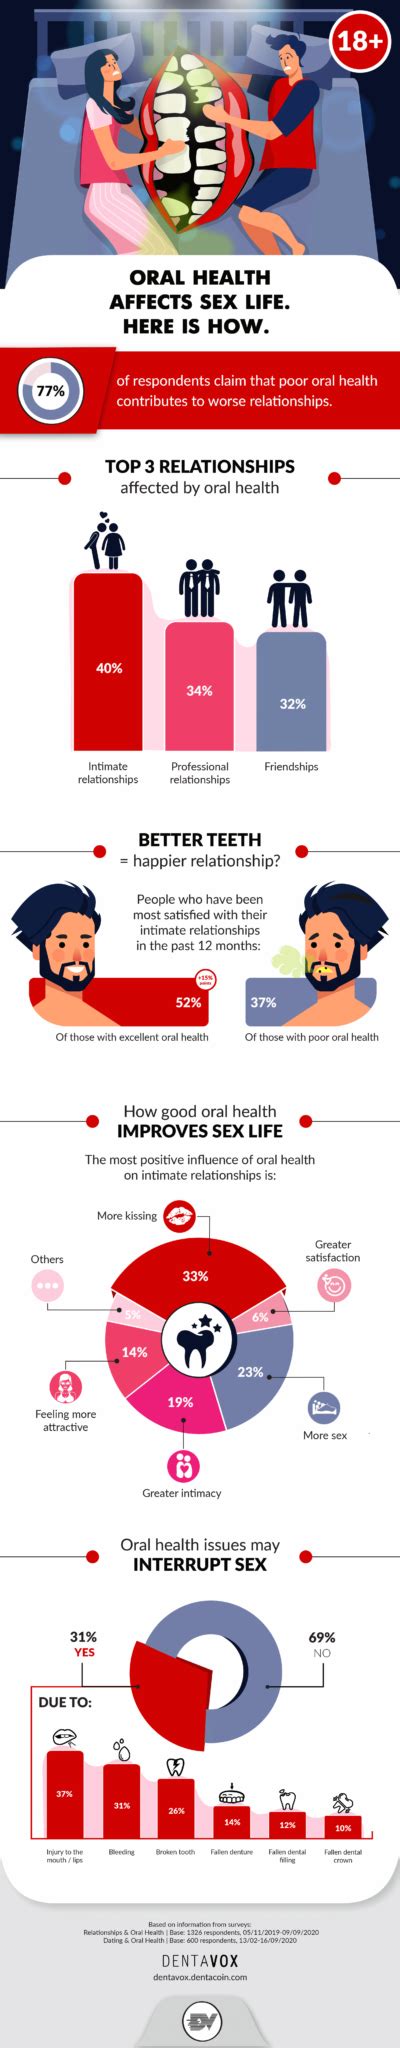 oral health affects sex life here is how dental jay